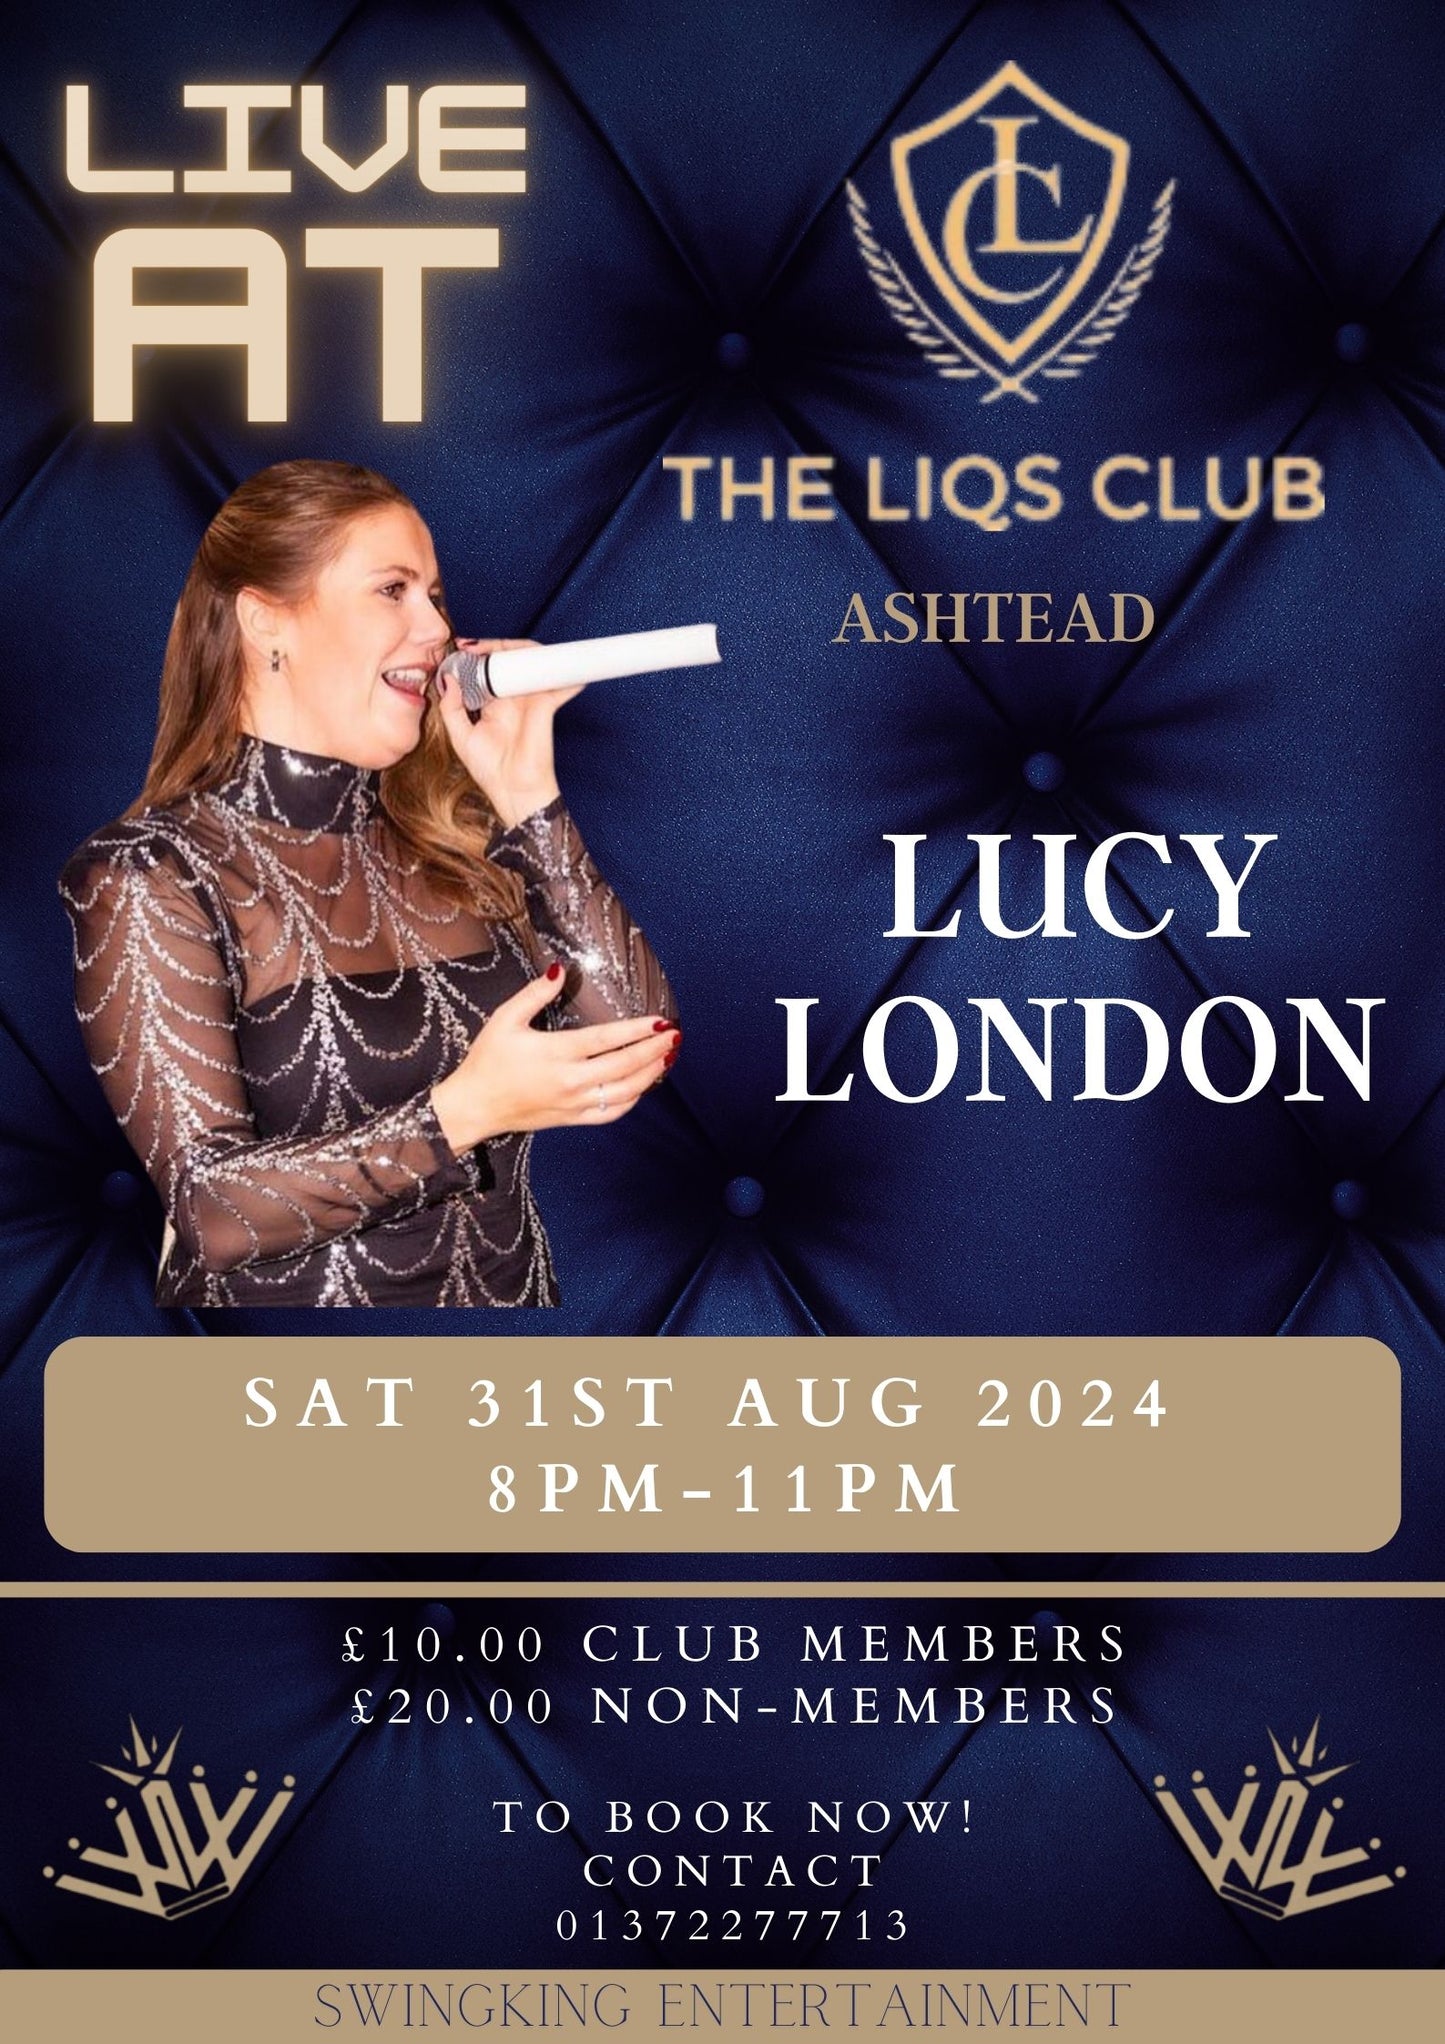 Live Music with Lucy London - Saturday 31st August 2024